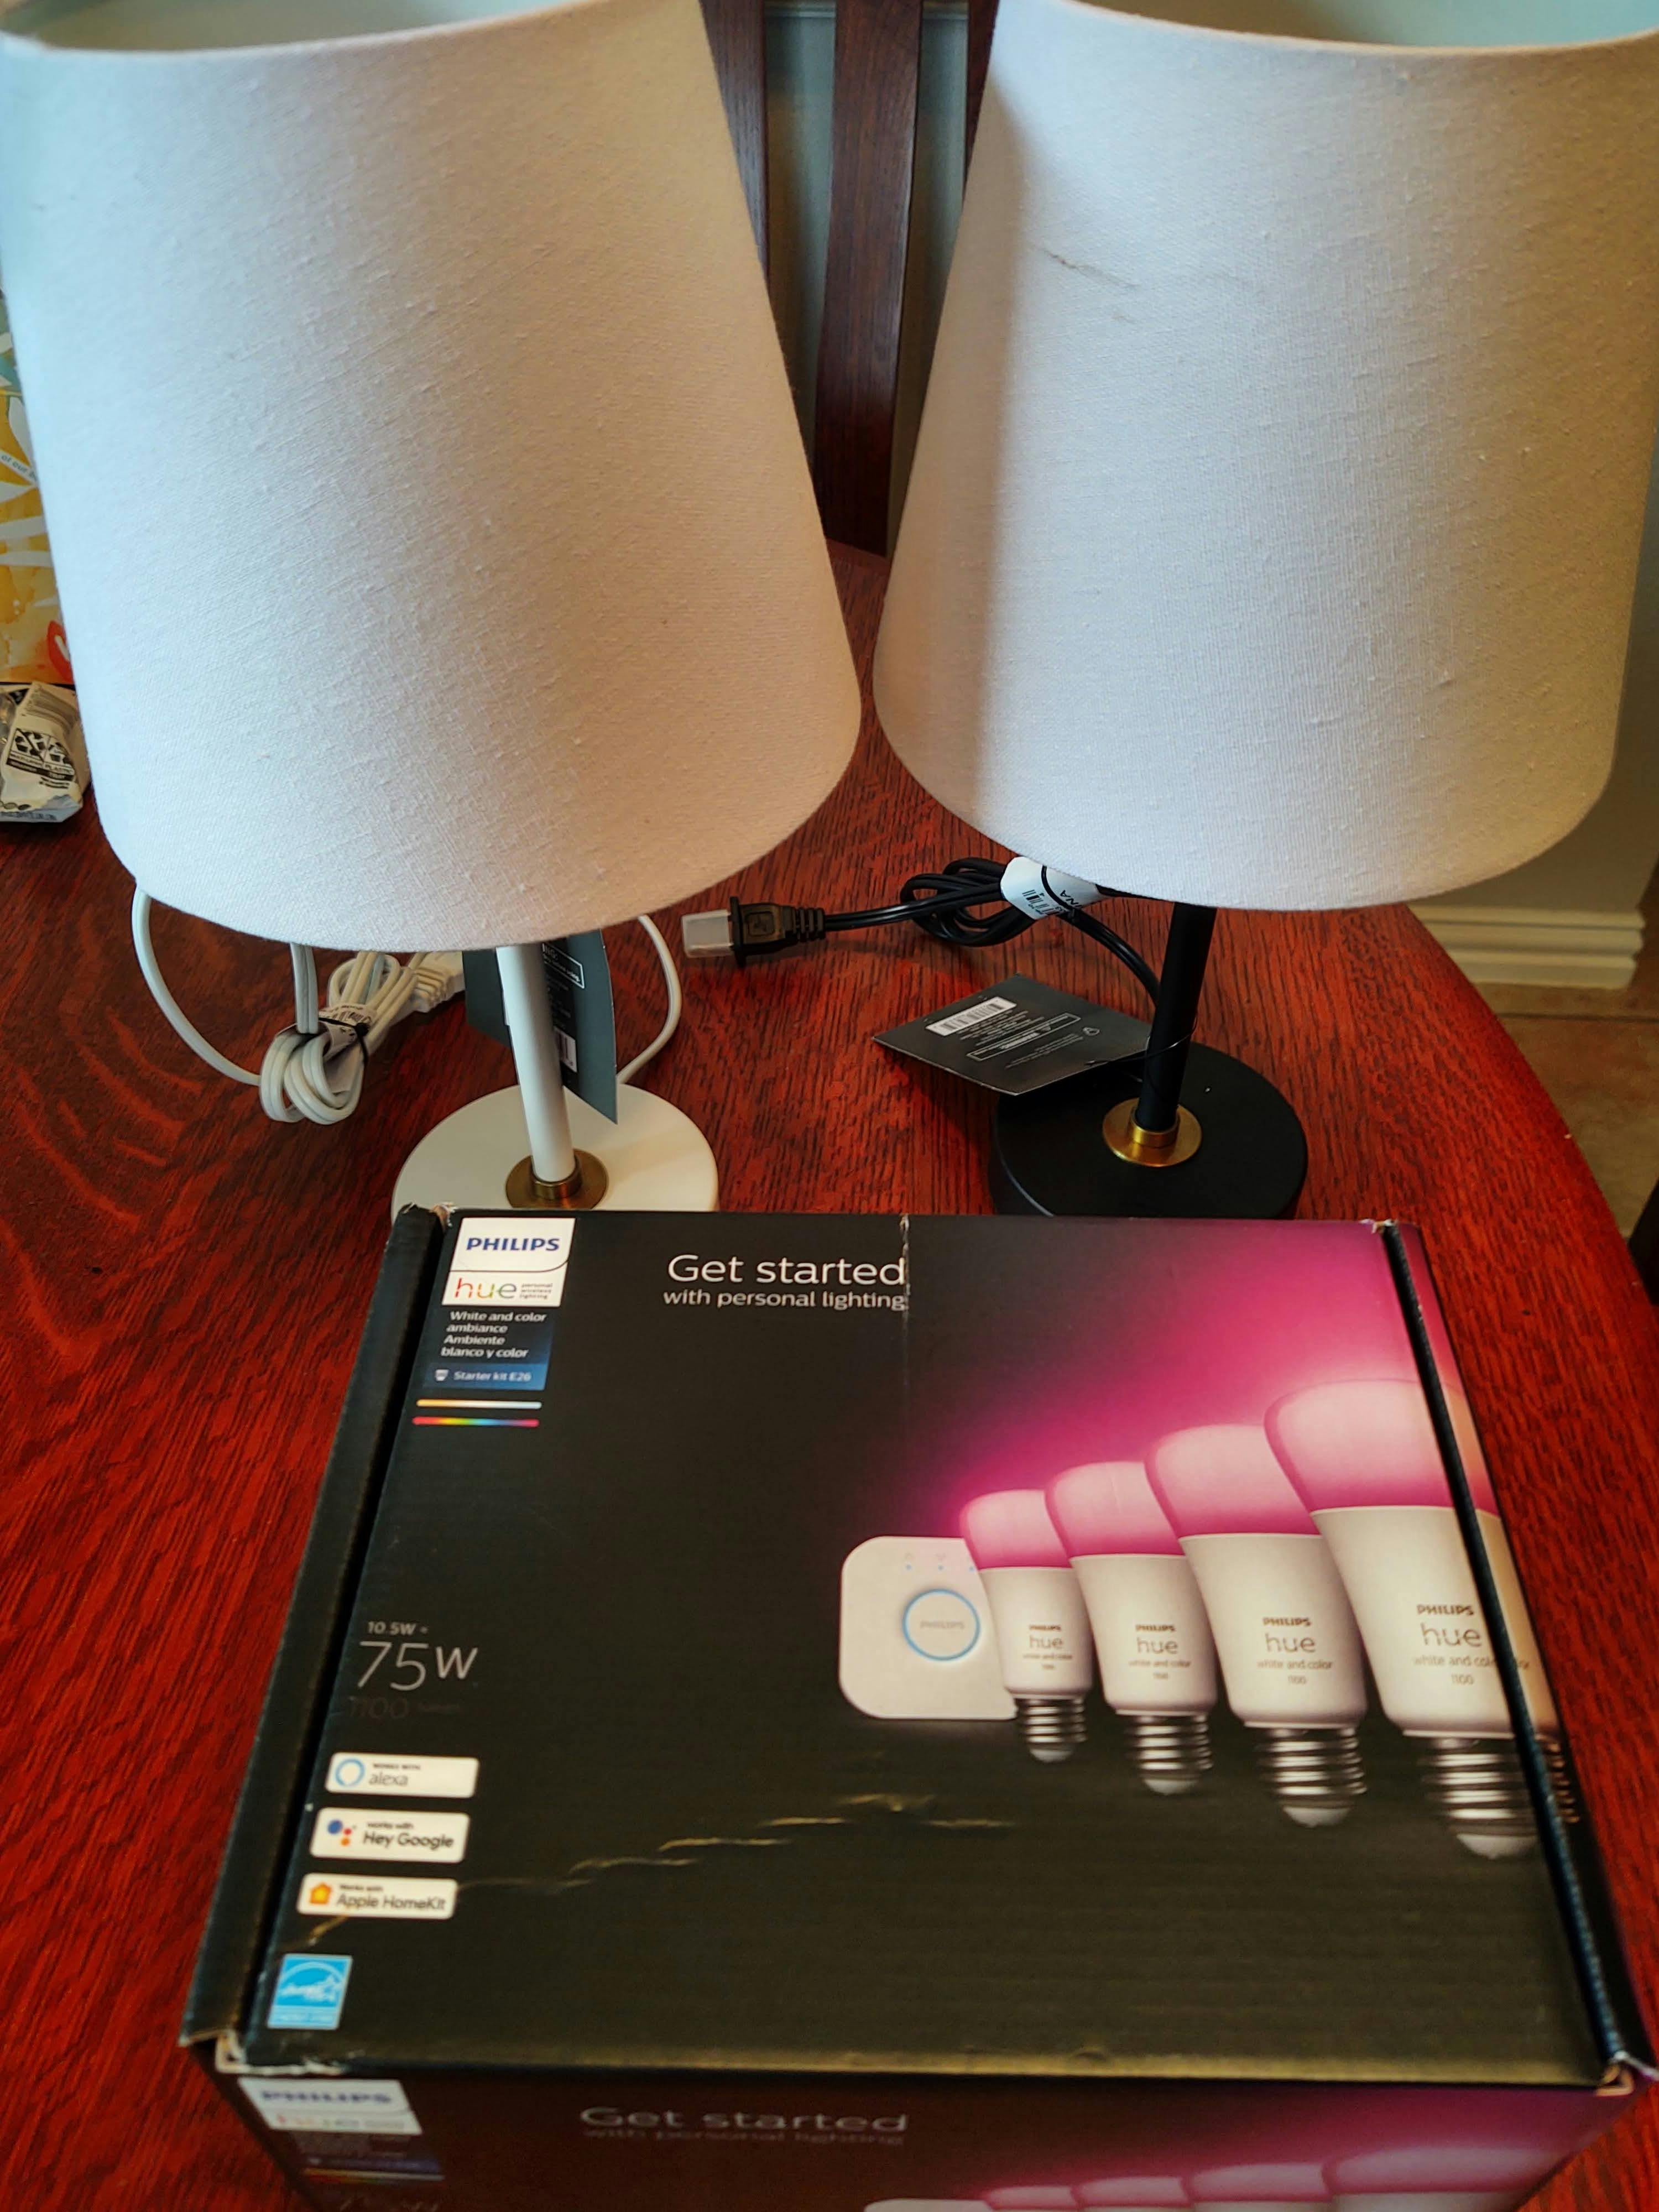 kit-and-lamps.jpg